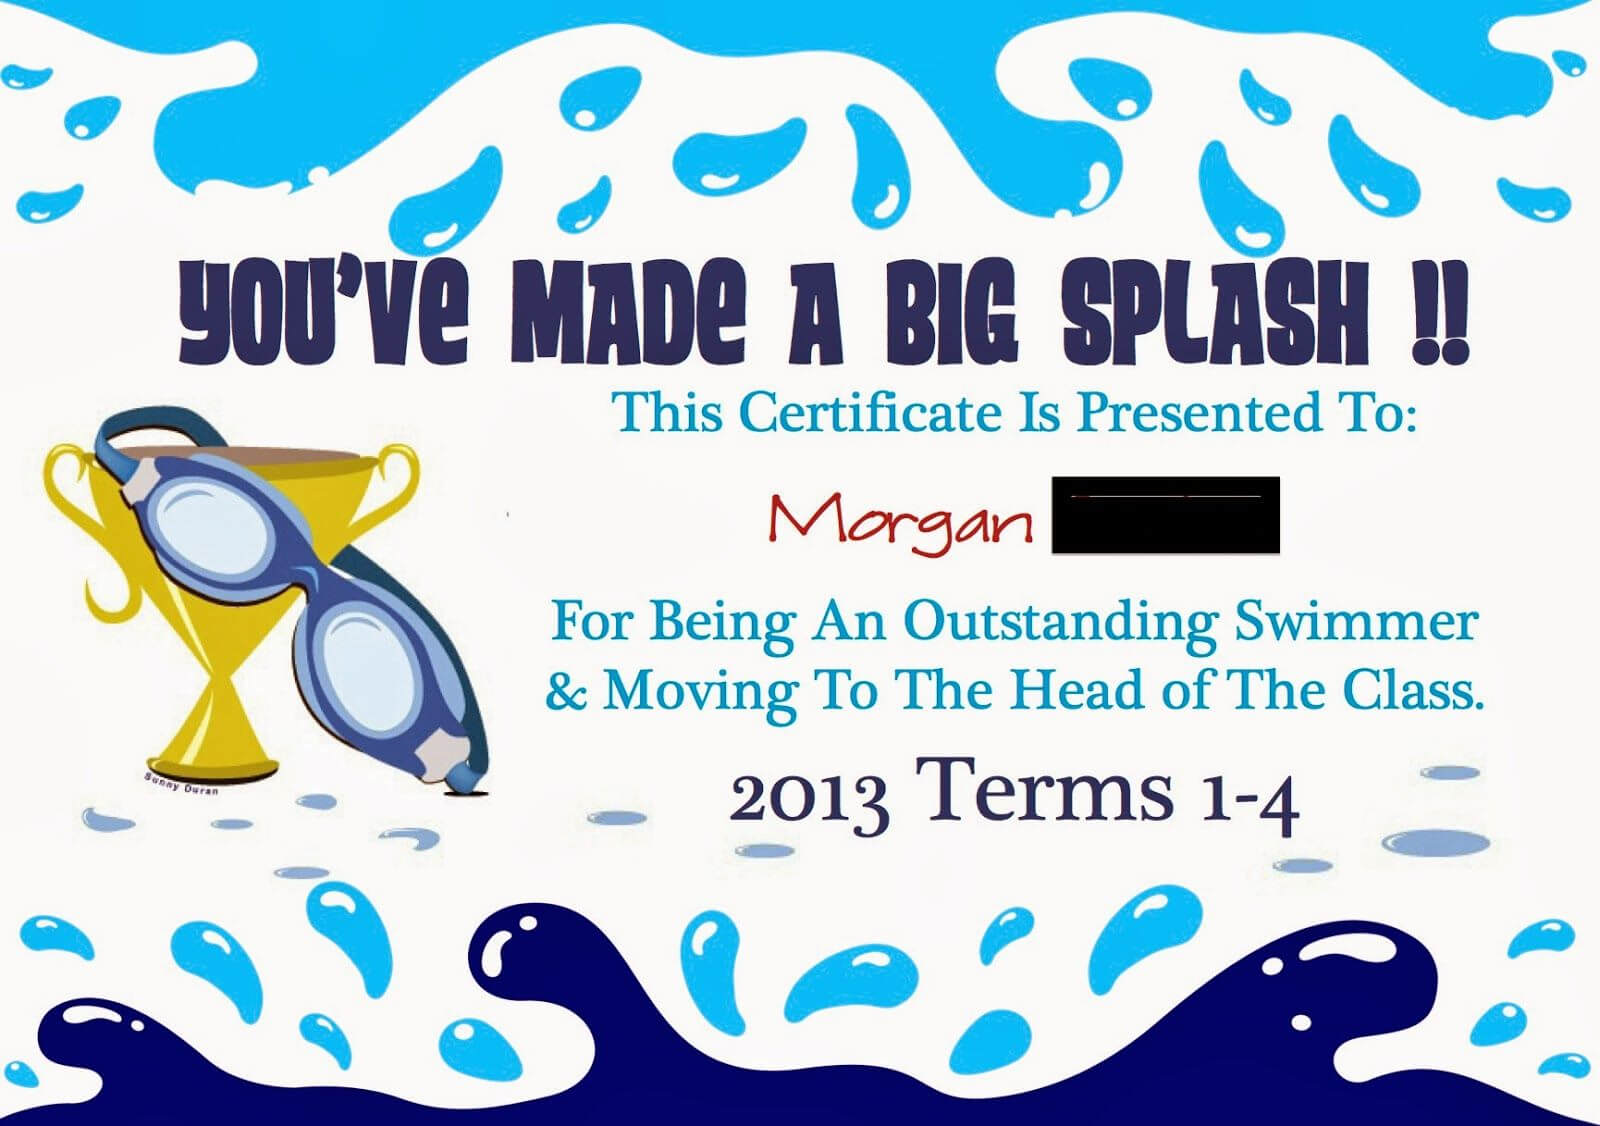 Pinmarwa Mattar On Swimming | Swimming Lessons For Kids Inside Swimming Award Certificate Template